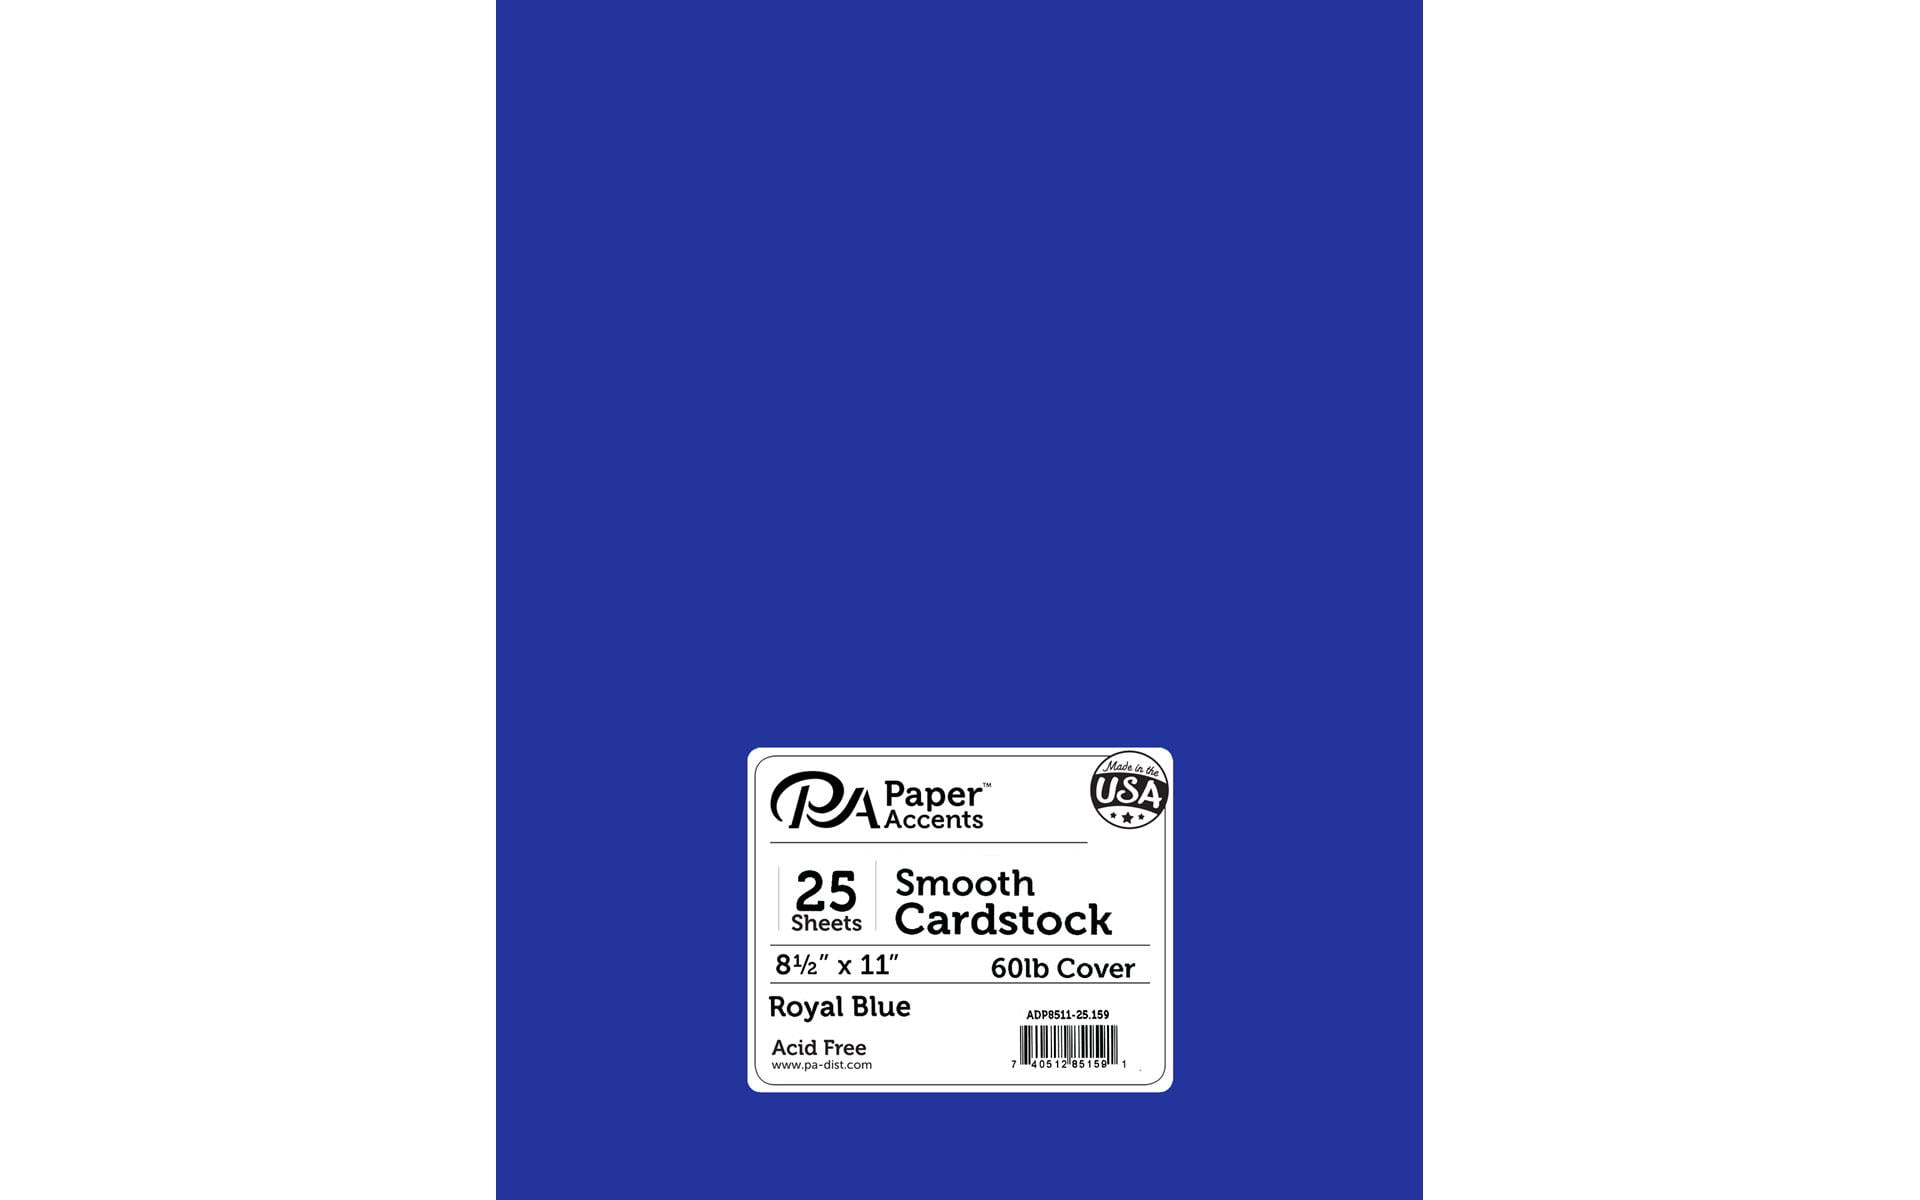 8 1/2 x 14 Legal Size Card Stock Paper - Premium Smooth 65lb